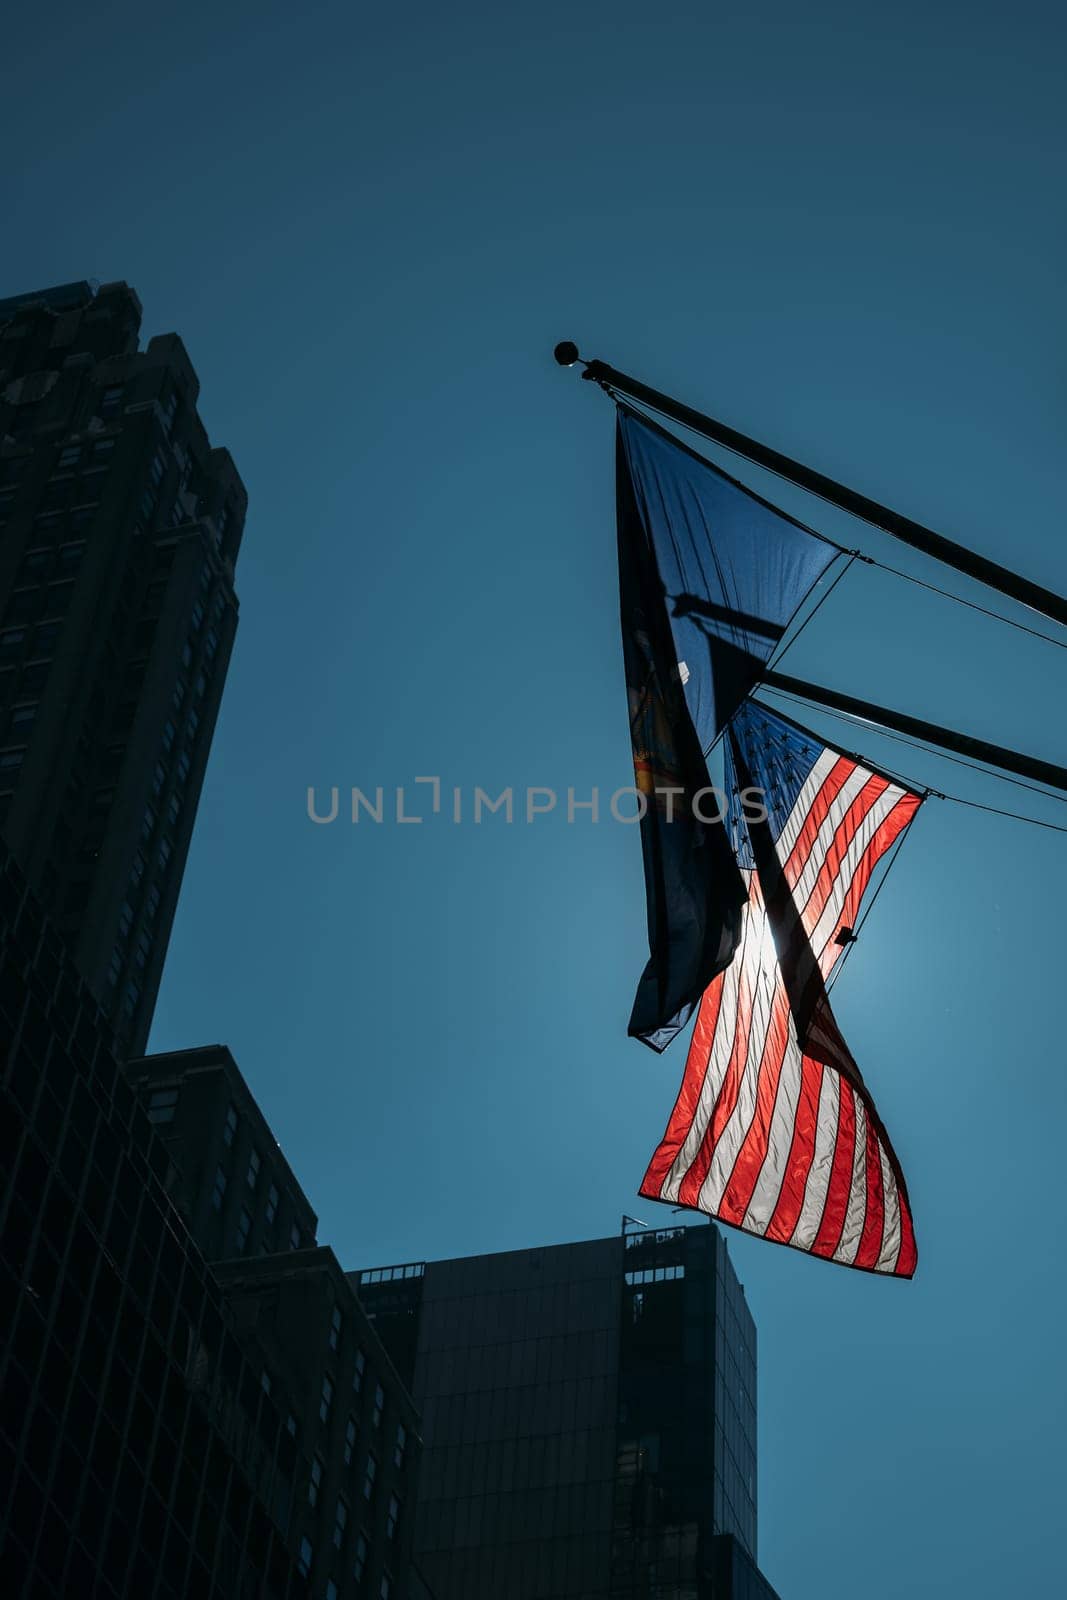 A view of an American flag waving in the wind against a backdrop of New York City's tall buildings on a clear day.